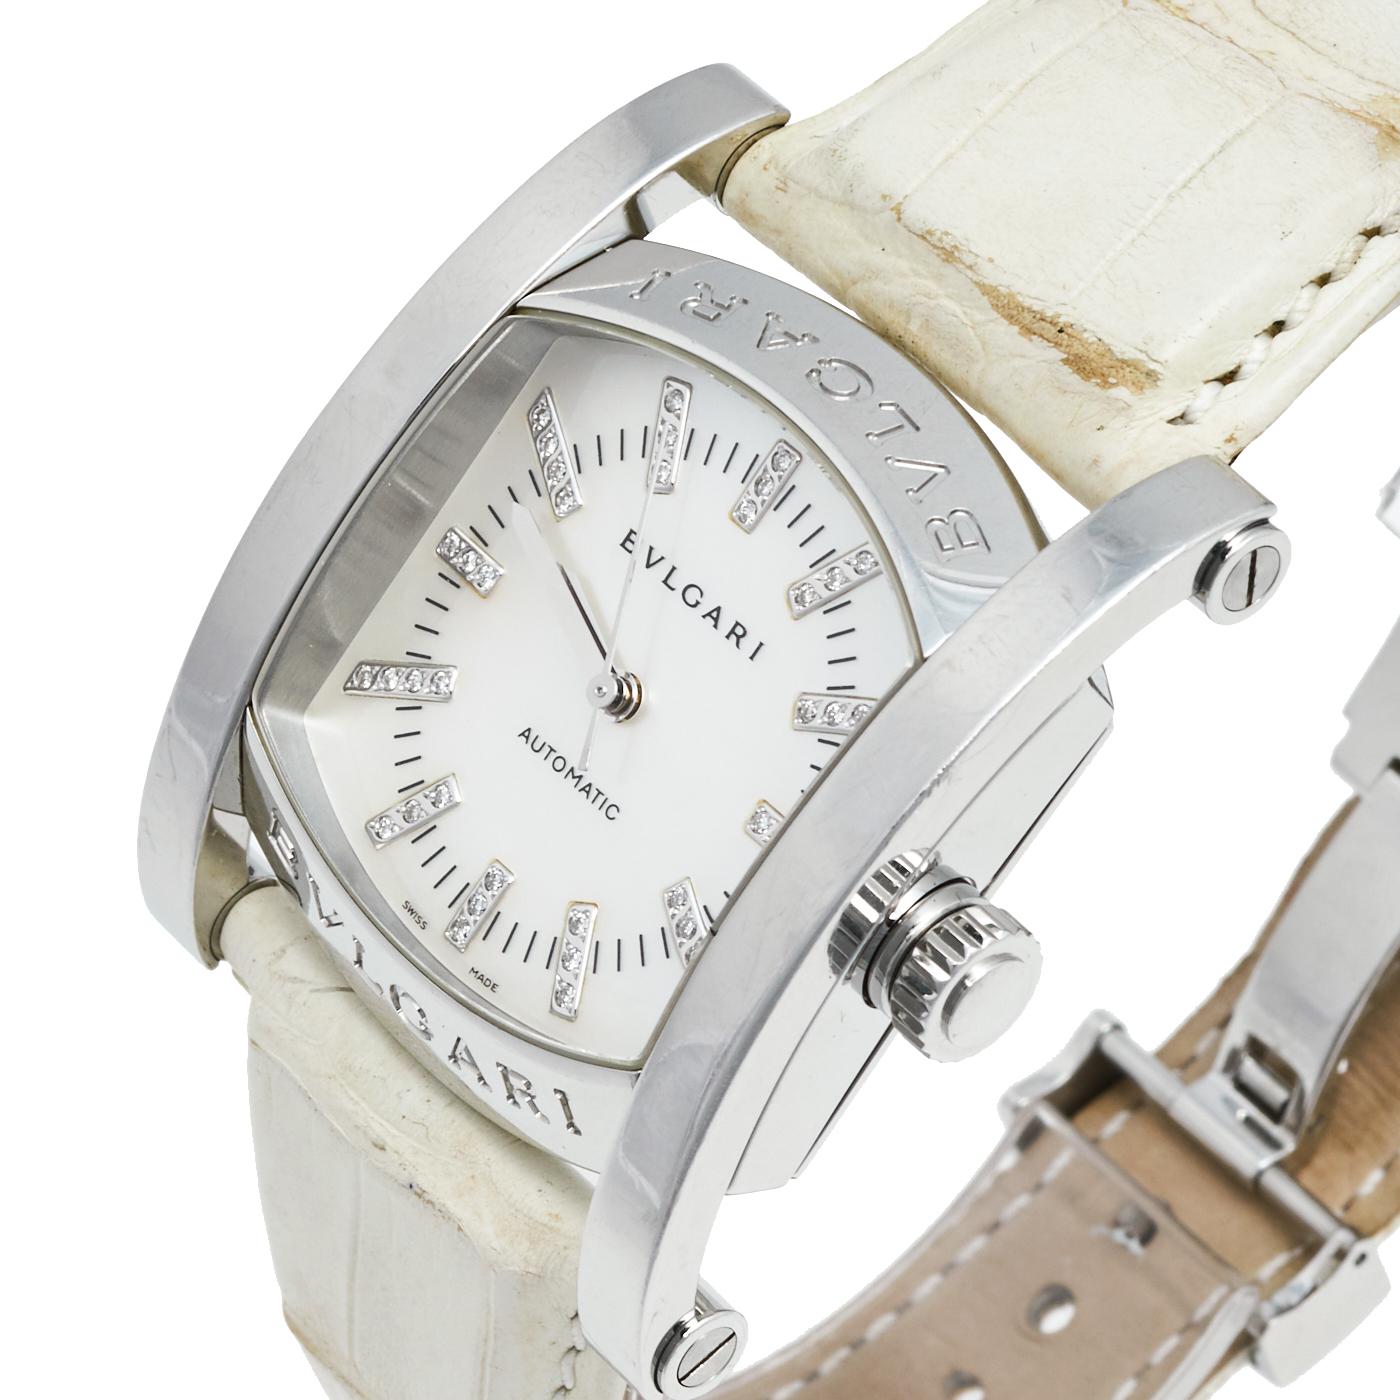 Complement your everyday look with this timepiece from Bvlgari. Swiss-made, the automatic watch has been created using stainless steel and leather. It carries a gorgeous Mother of Pearl dial set with diamond hour markers and three hands. It has a